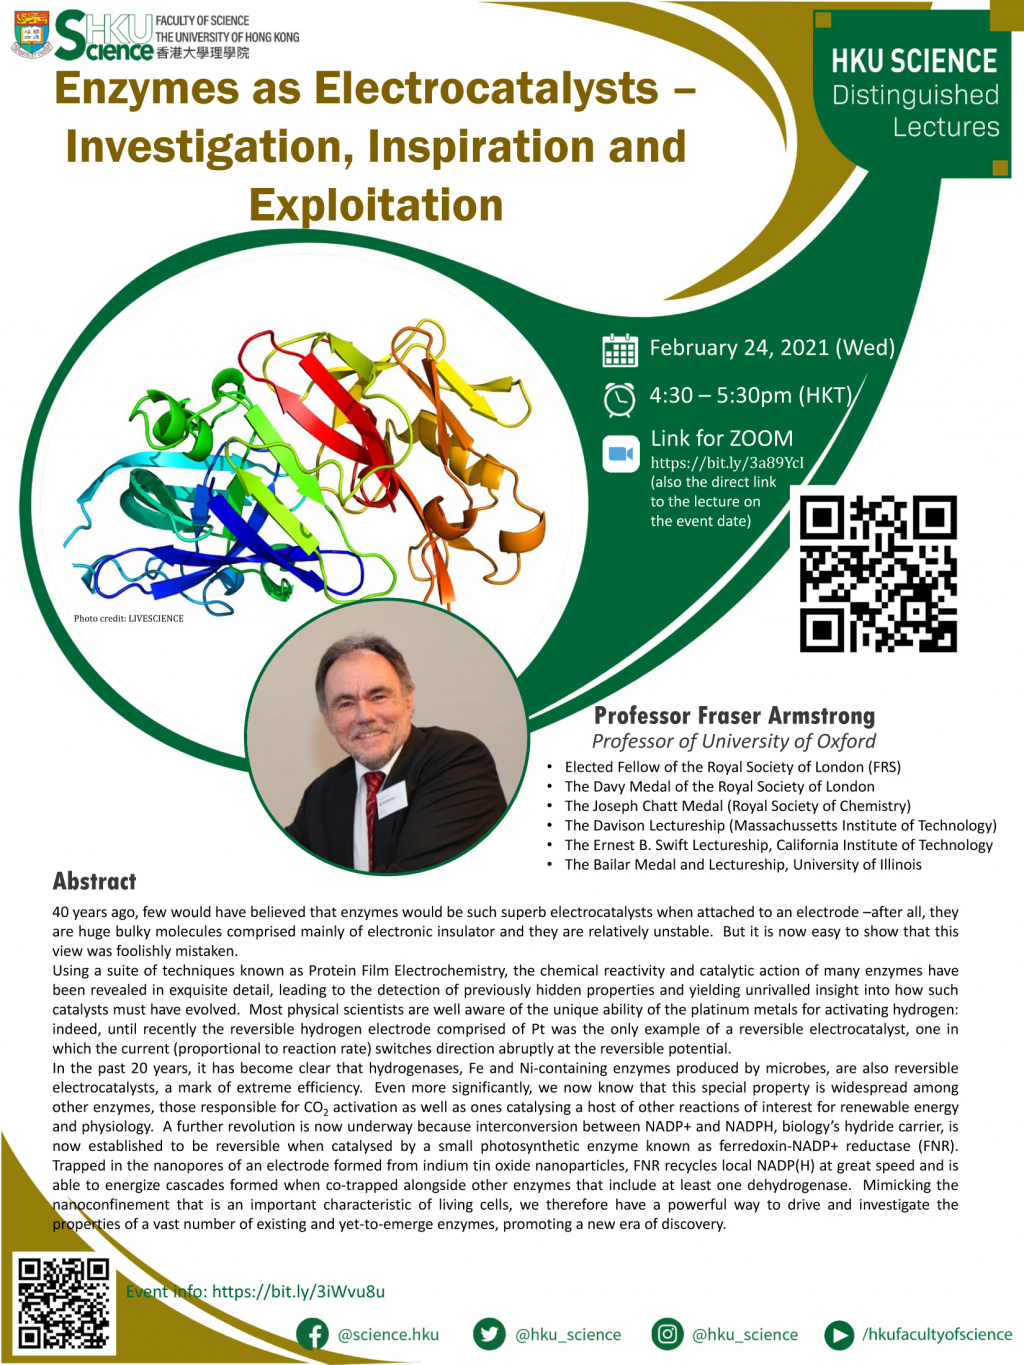 Distinguished Lecture - Enzymes as Electrocatalysts - Investigation, Inspiration and Exploitation